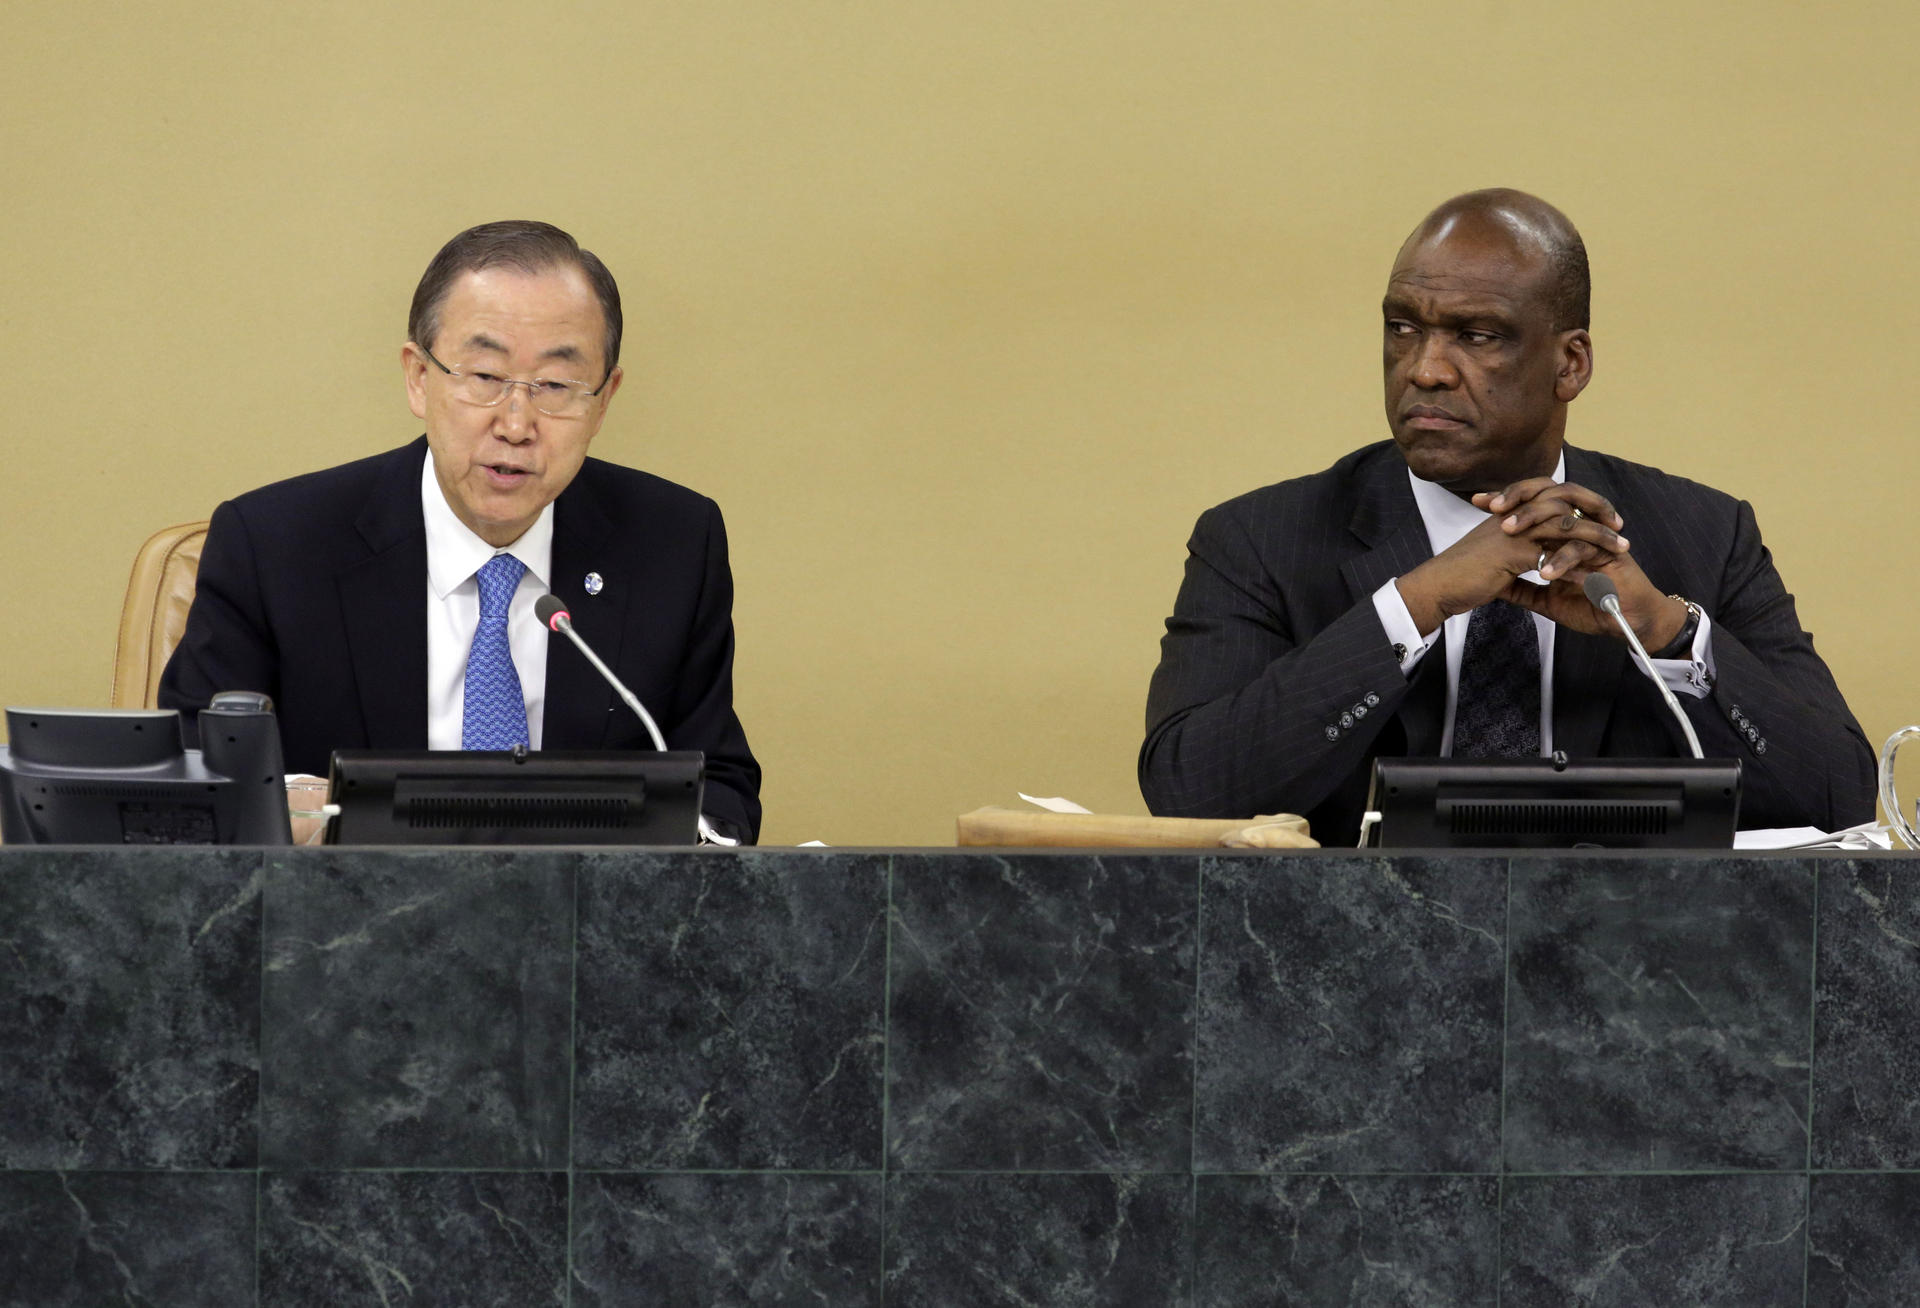 UN chiefs Ban Ki-moon and John Ashe call for a greater focus on the disabled. Photo: AP